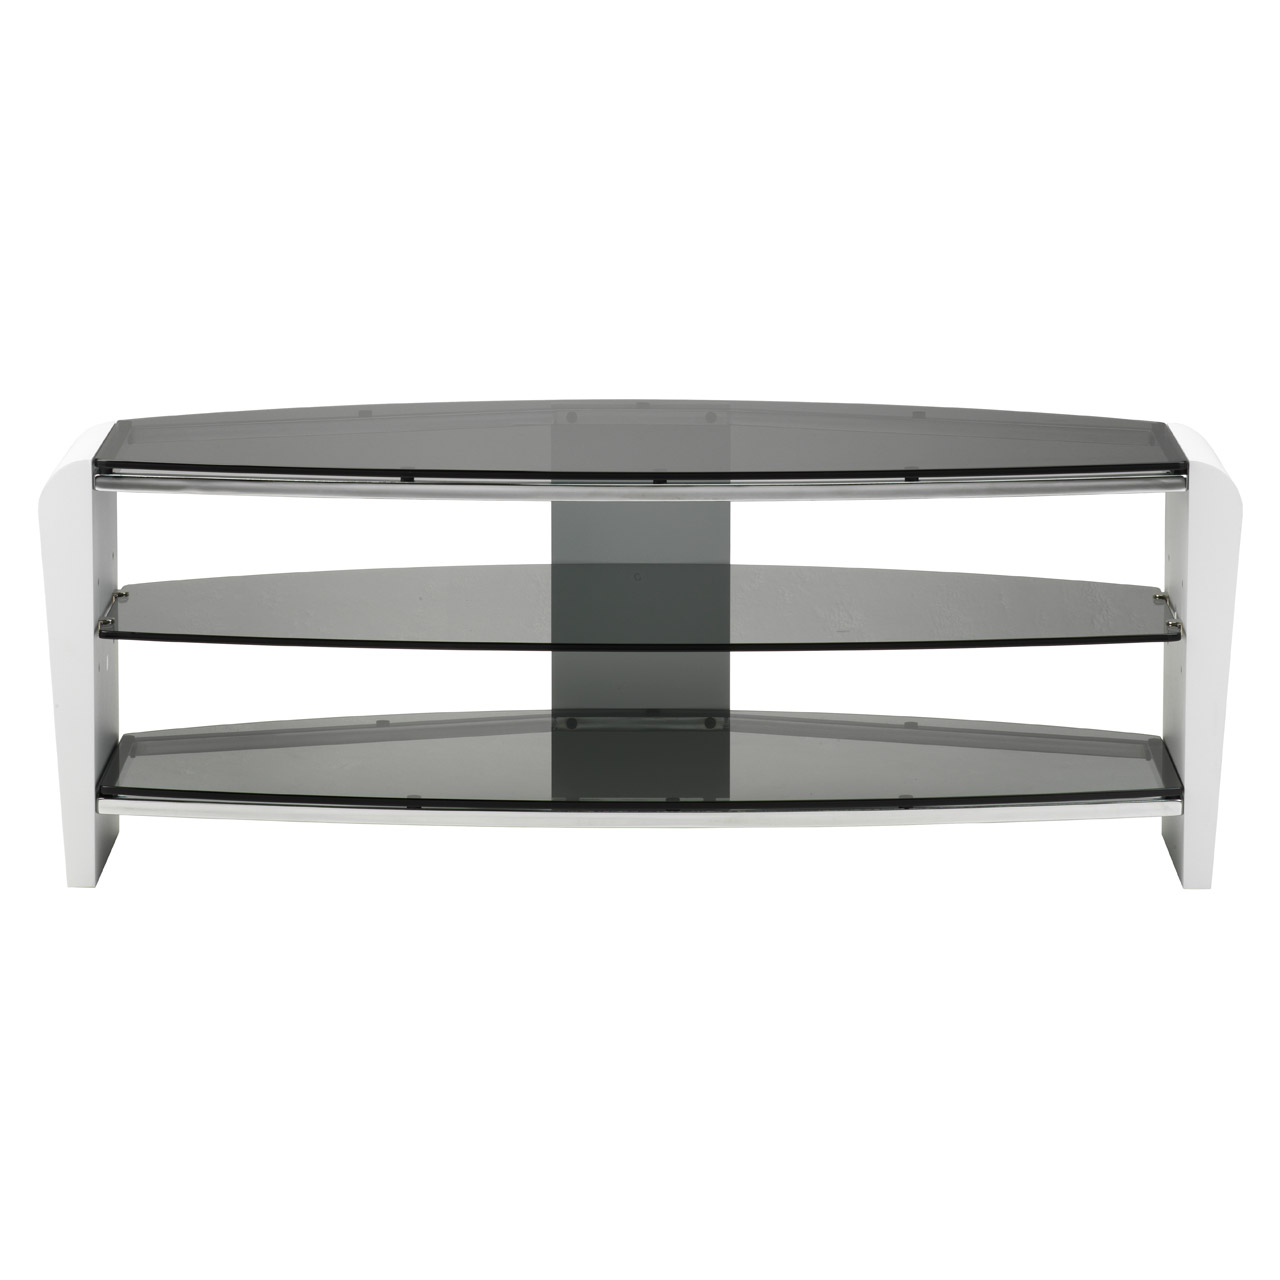 Image of Alphason FRN14003WHSK Francium TV Cabinet 1400mm Wide in White Black G